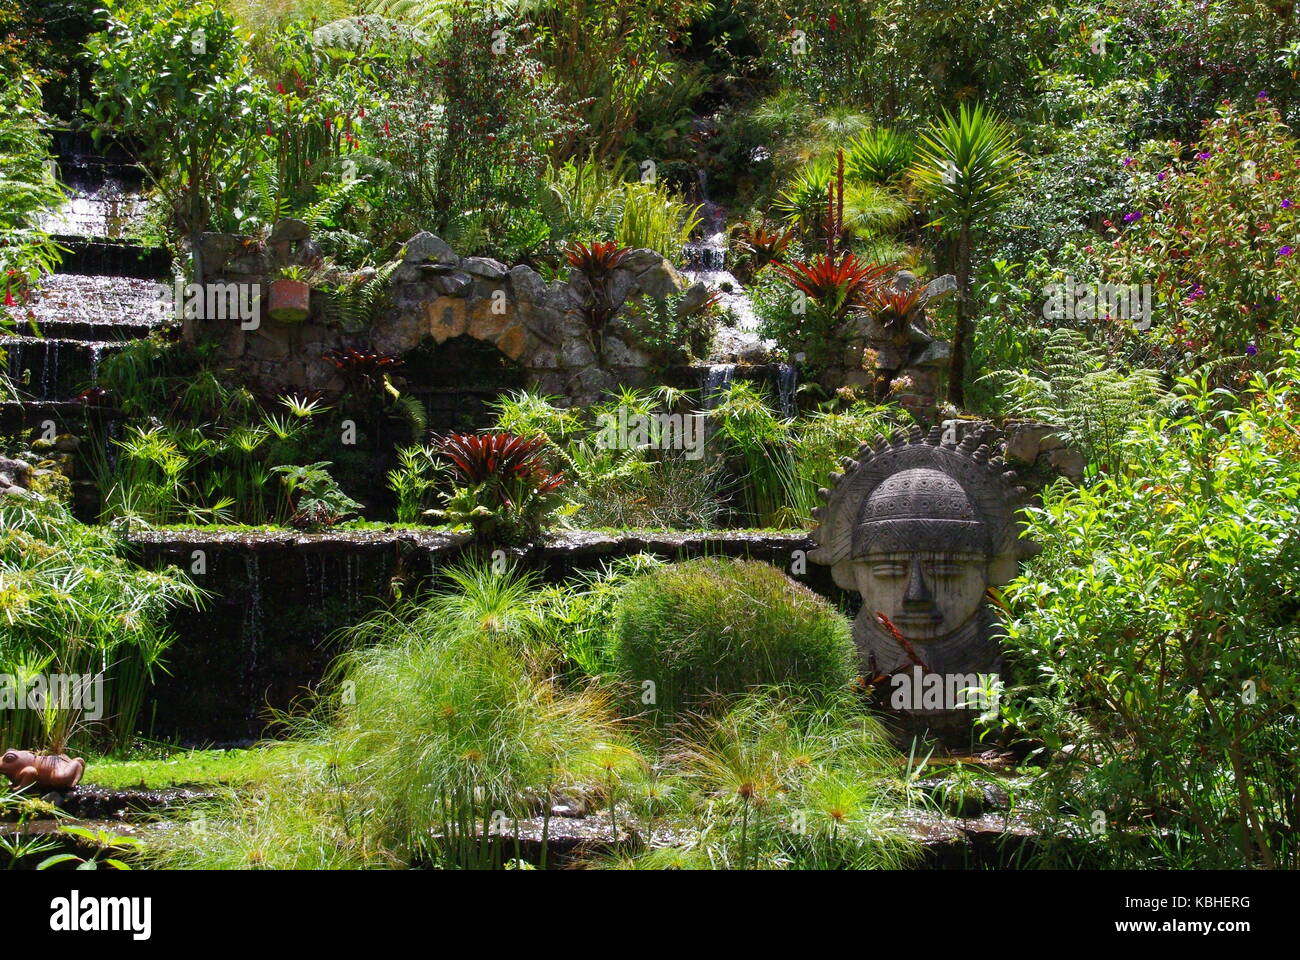 The Garden at the base of Monserrate, Bogota, Colombia Stock Photo